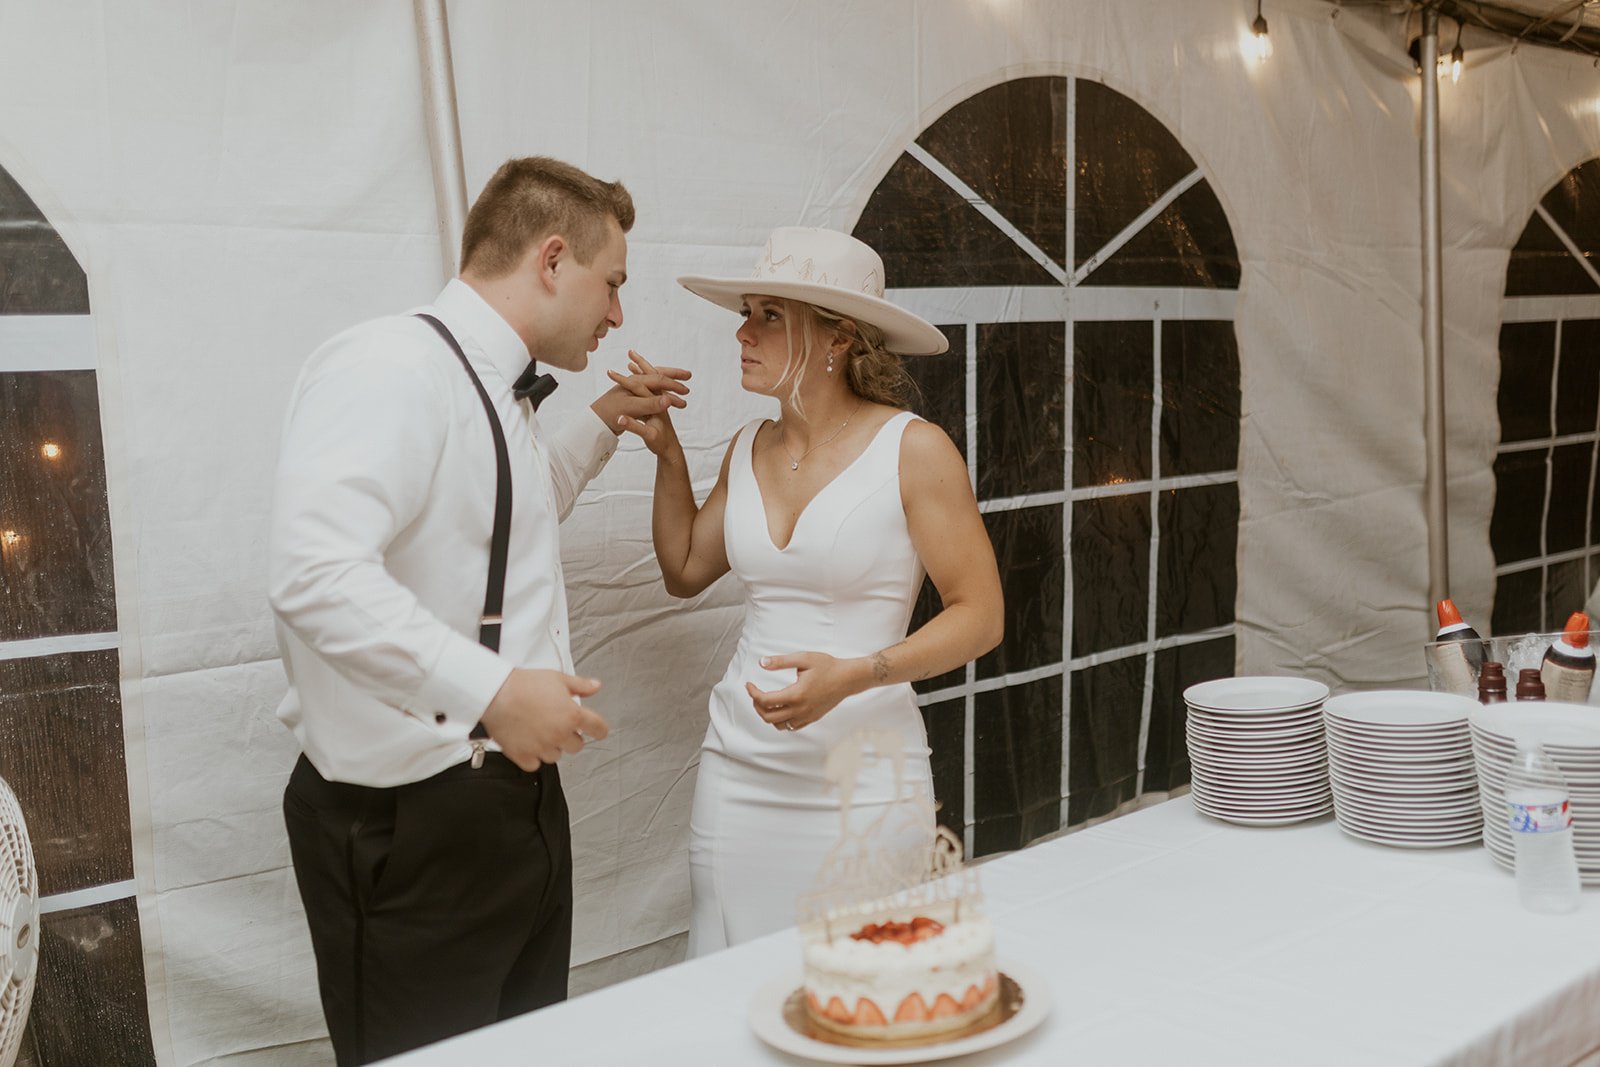 Bride and groom connect hands after sharing their first bite of cake together. 